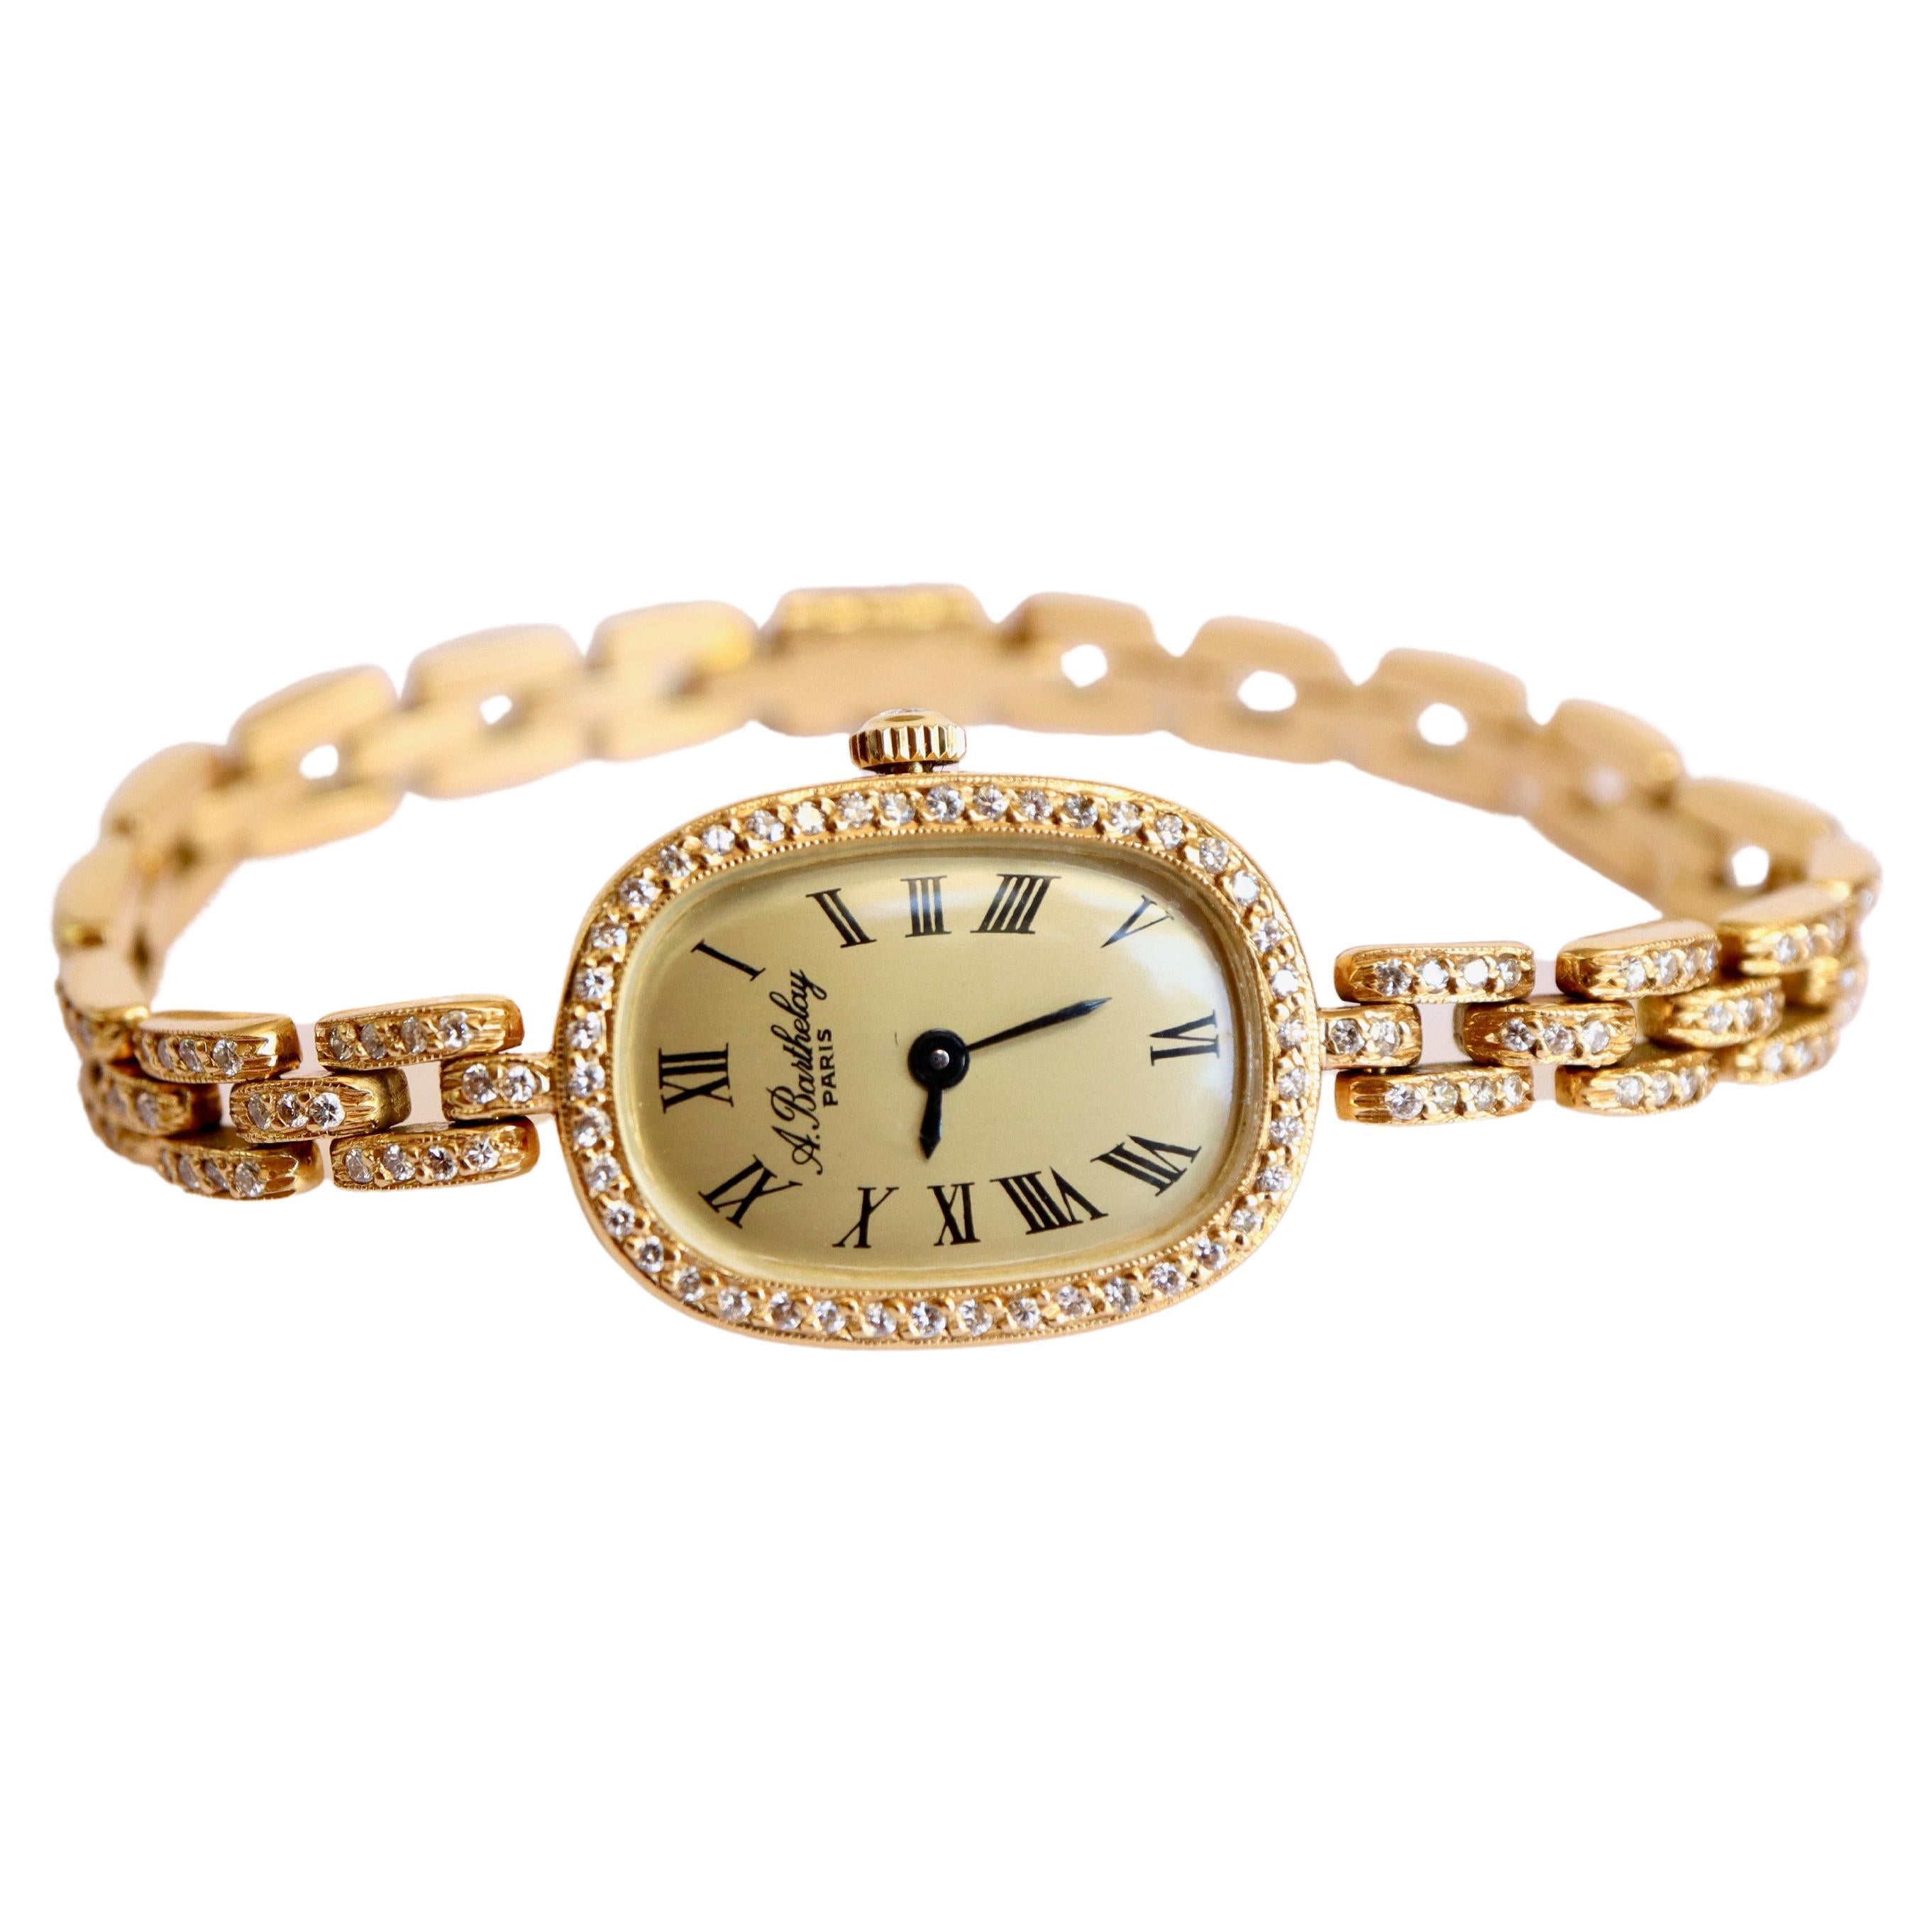 Alexis Barthelay Watch 18K Gold and Diamonds